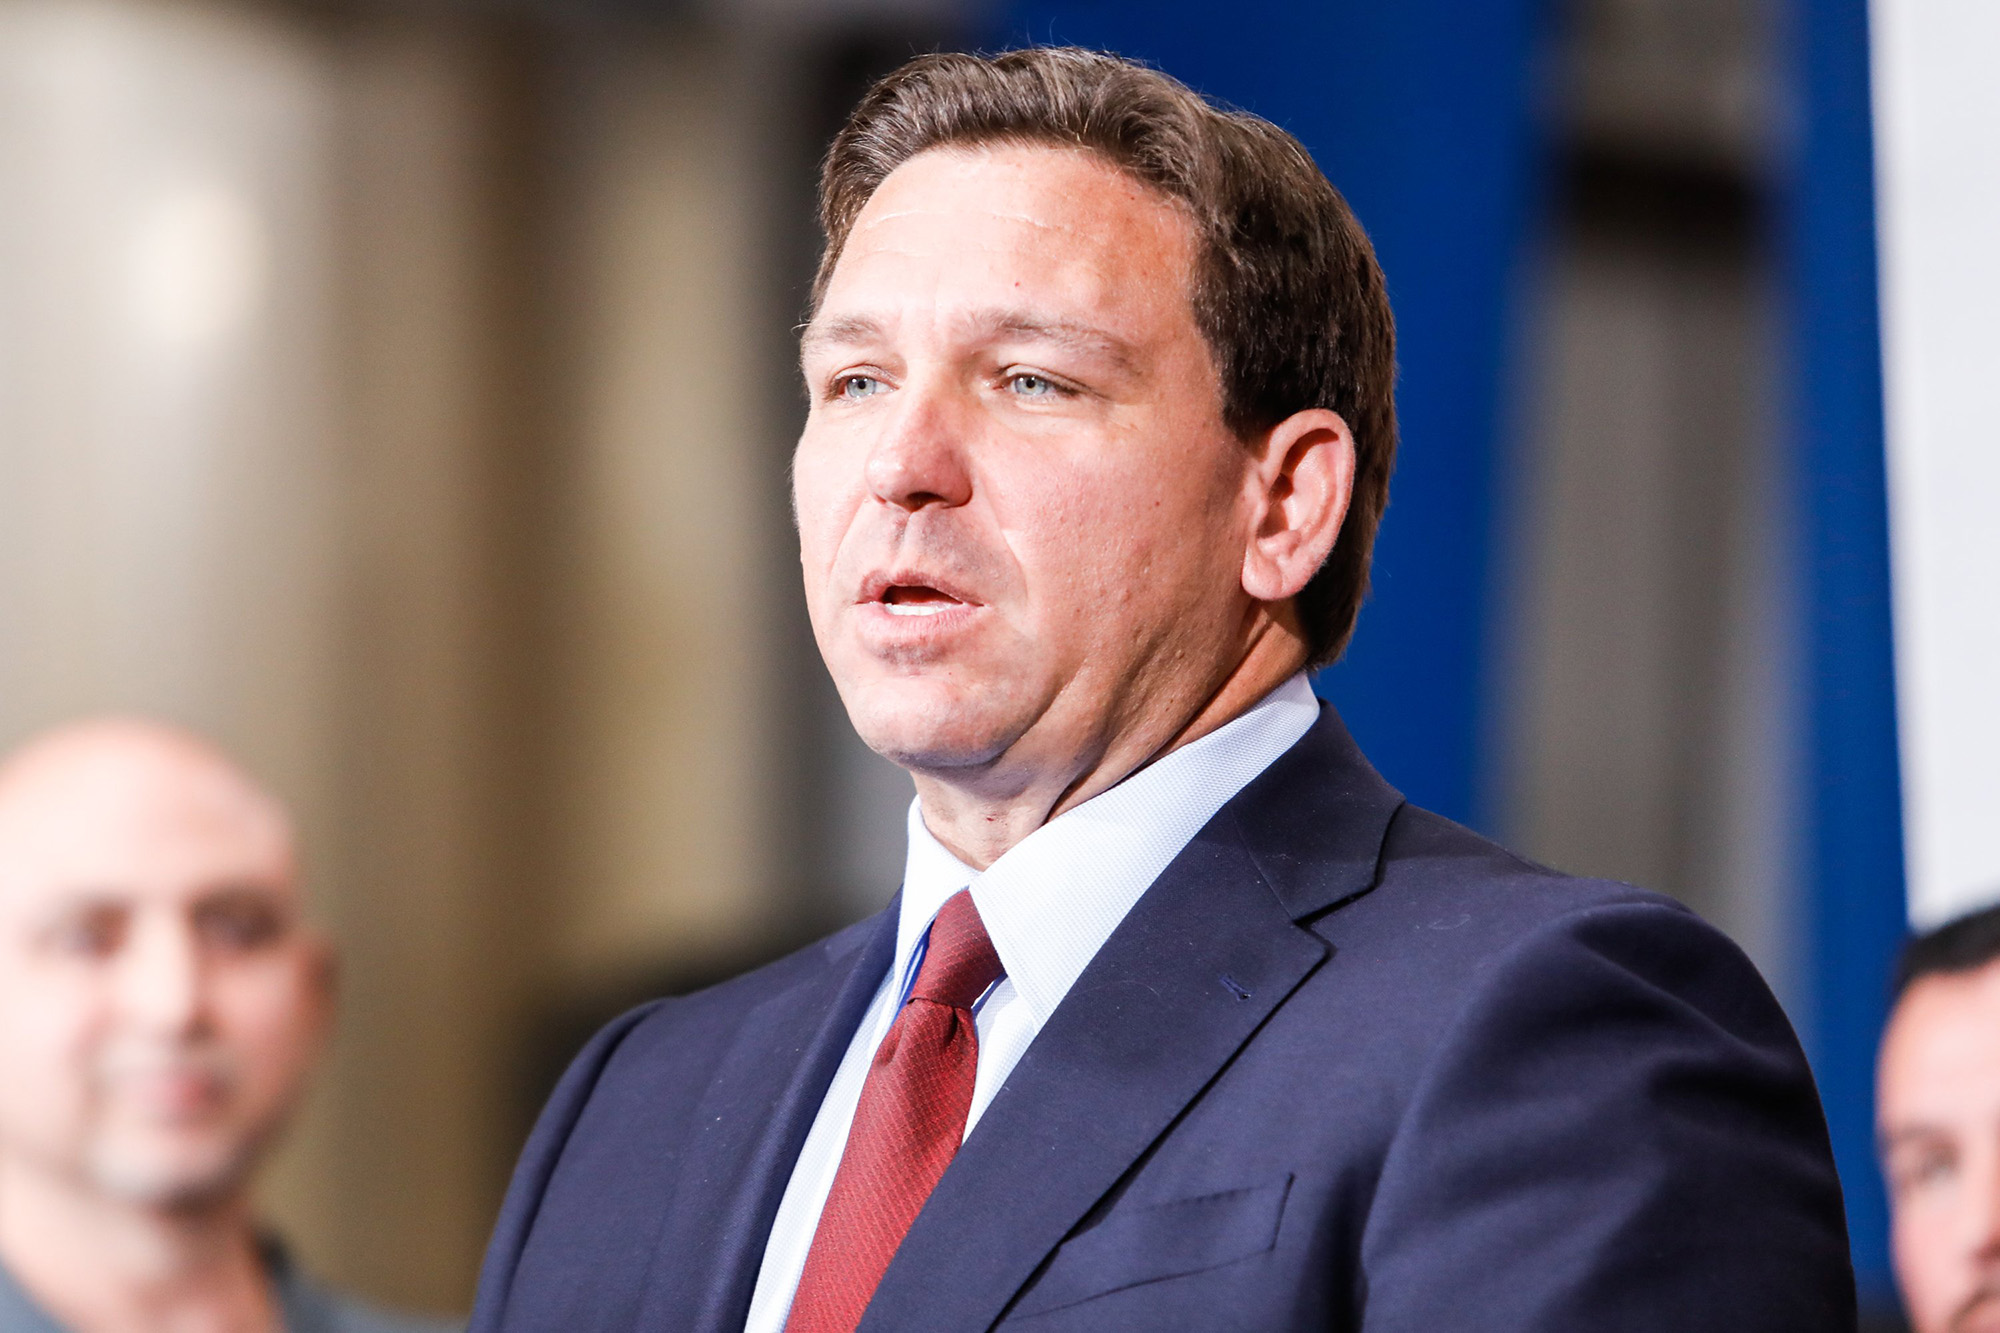 PHOTO: Gov. Ron DeSantis speaks during a campaign event in Tampa, Fla., Oct. 21, 2022.